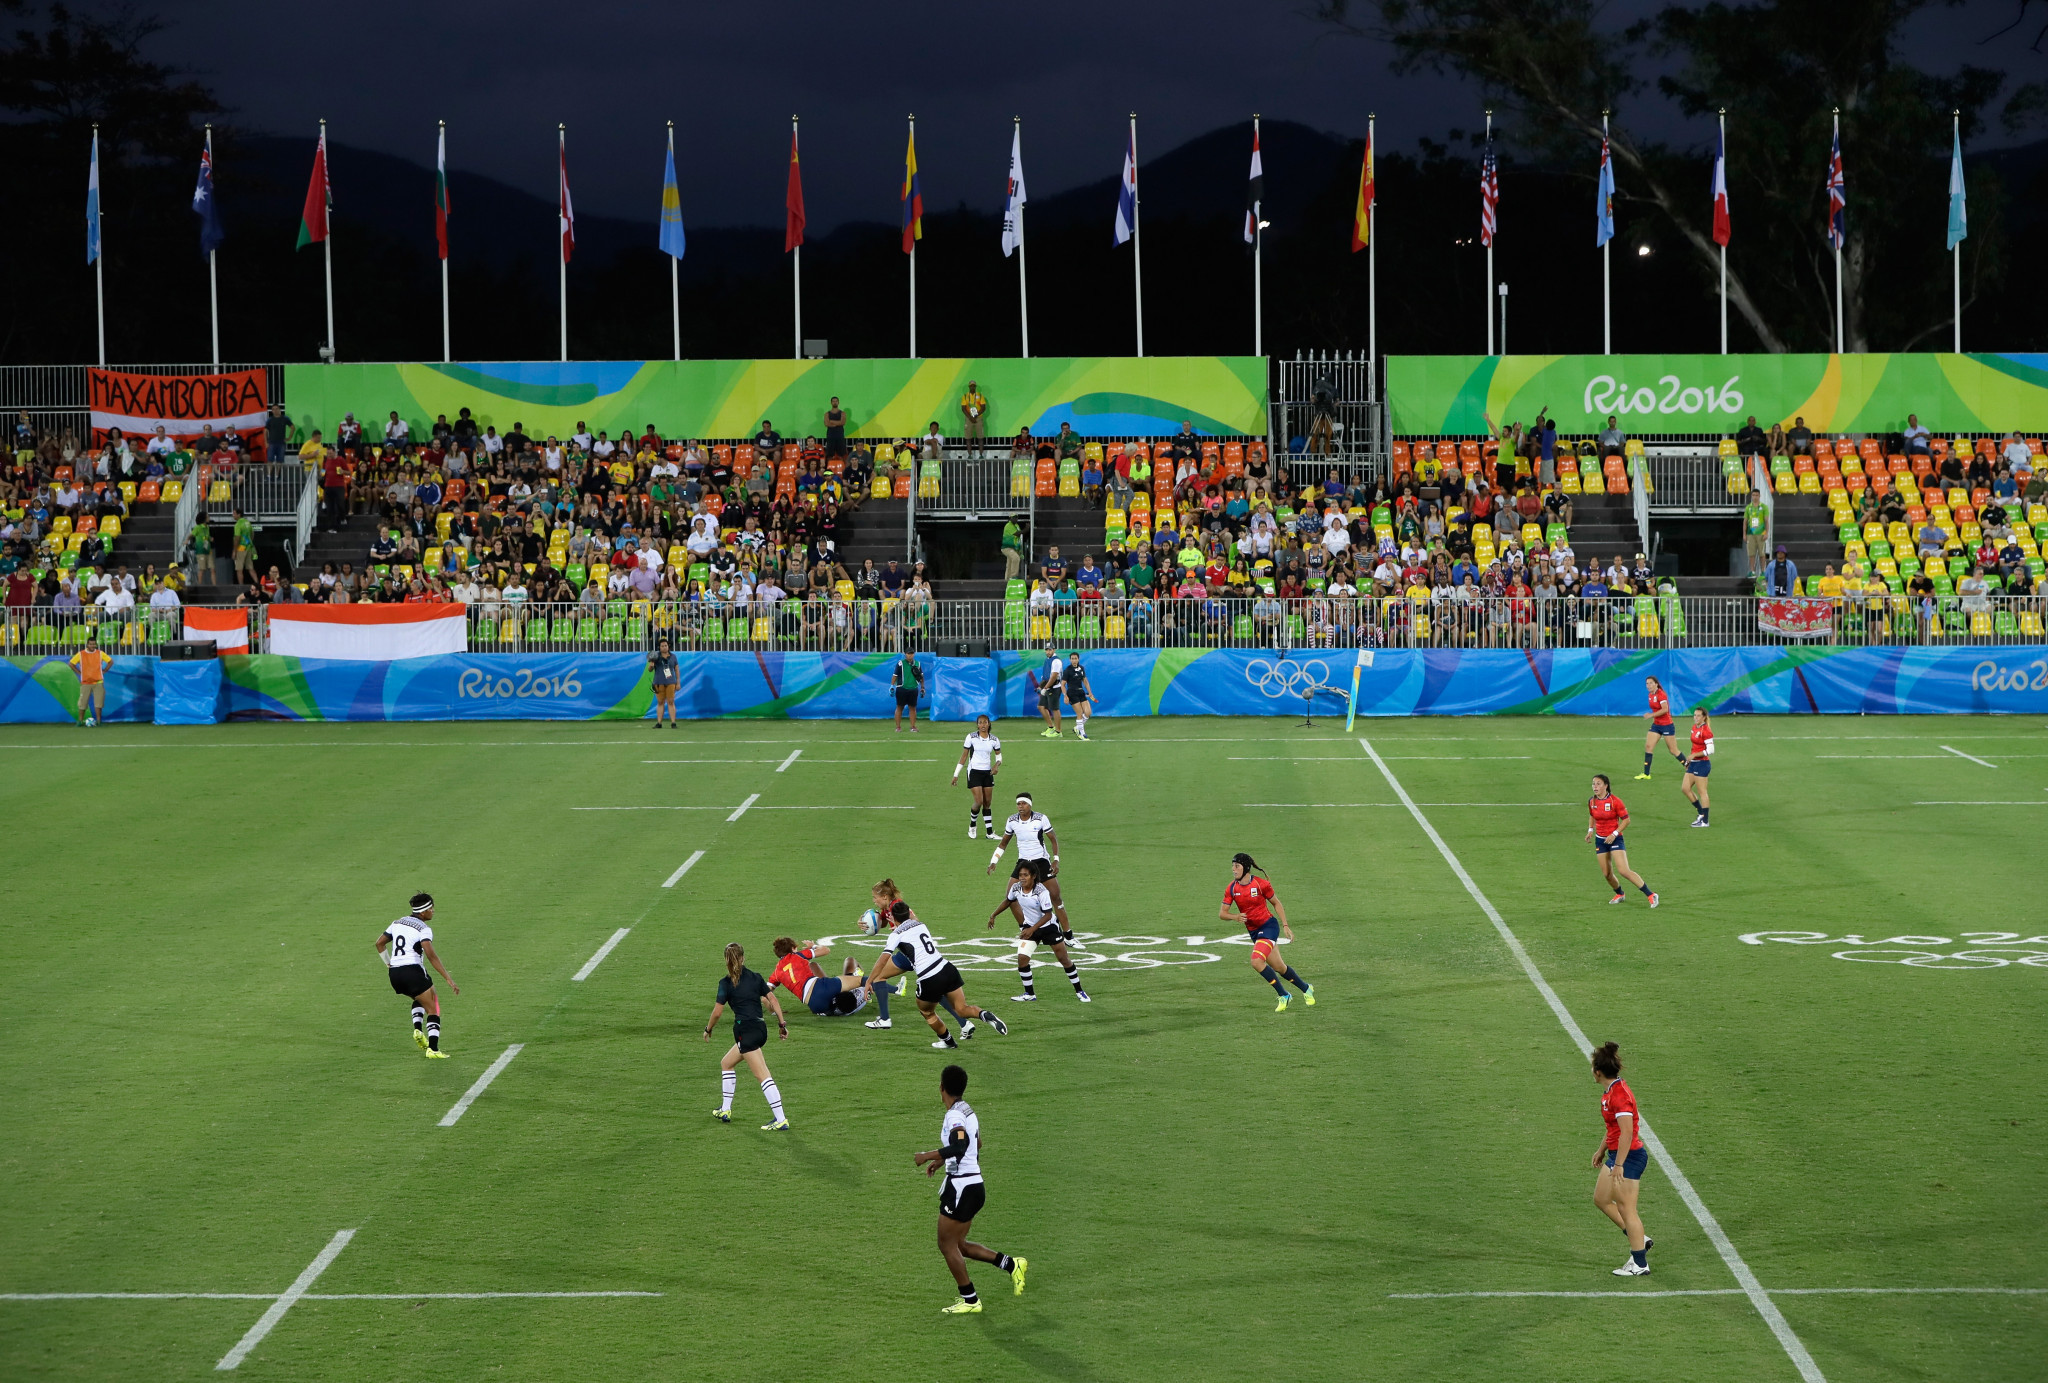 Rugby sevens debuted at the Olympics in Rio in 2016, putting the sport under extra scrutiny ©Getty Images